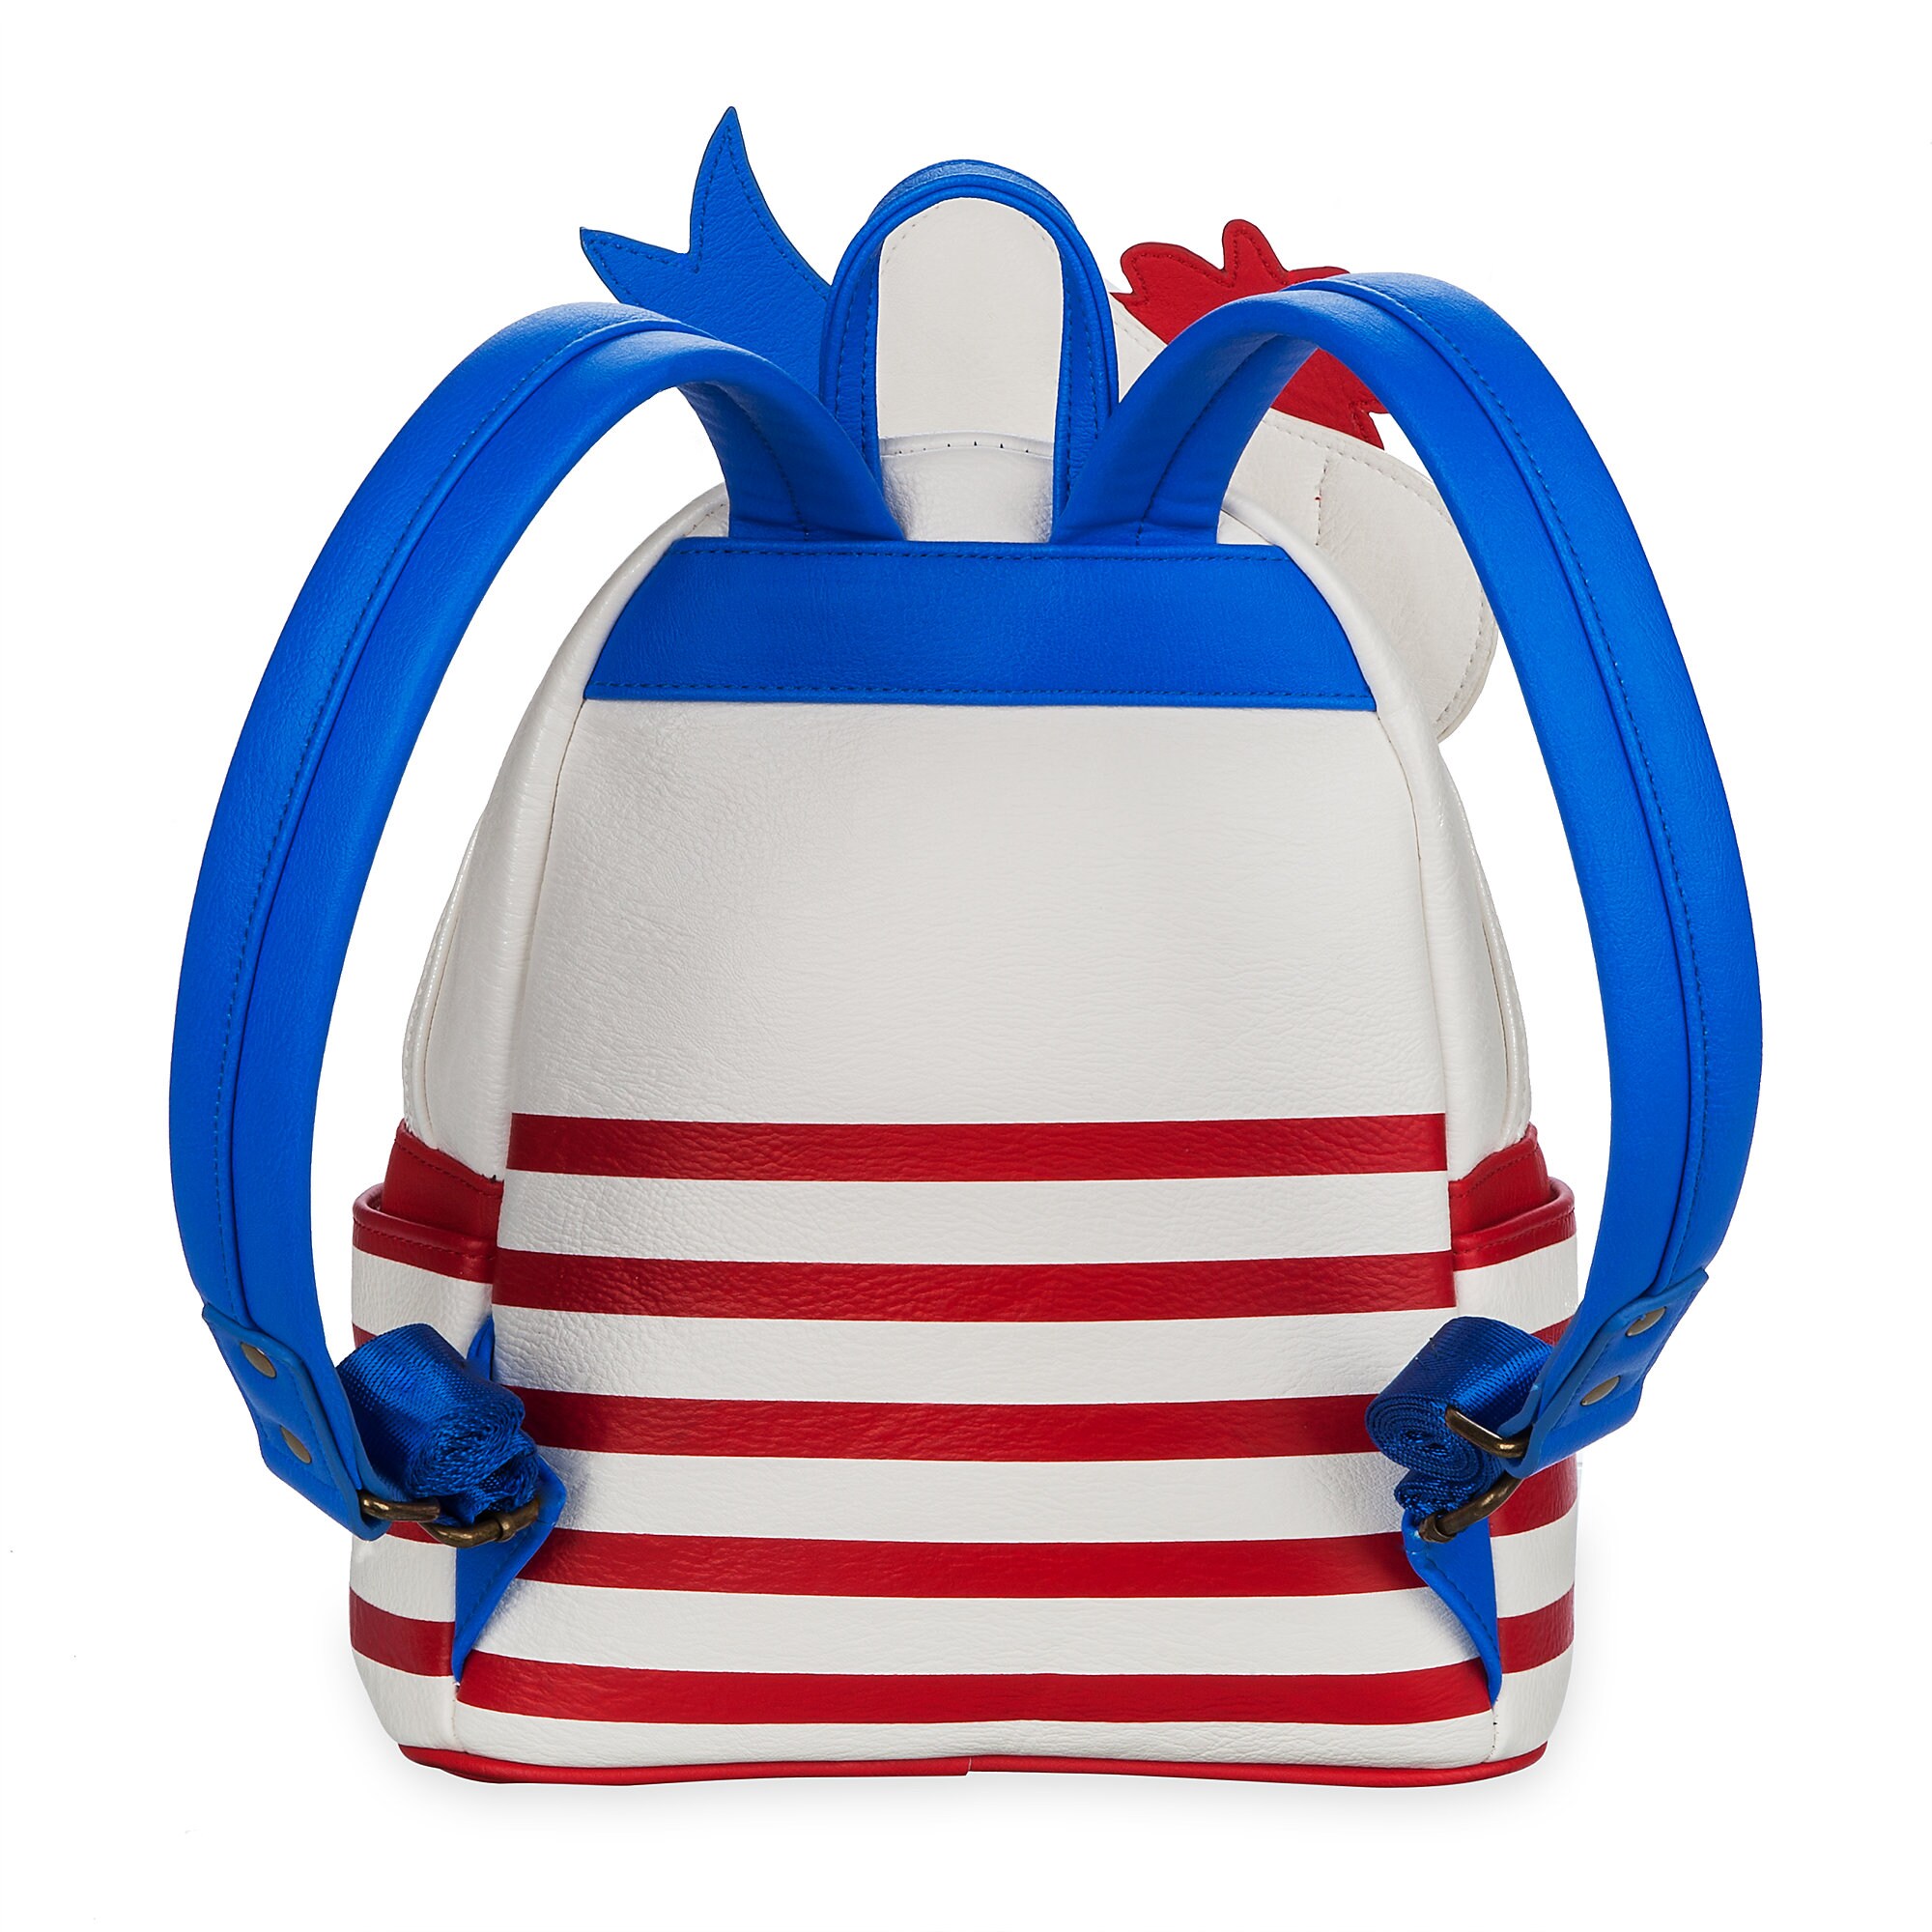 Donald Duck Disney Cruise Line Mini Backpack by Loungefly